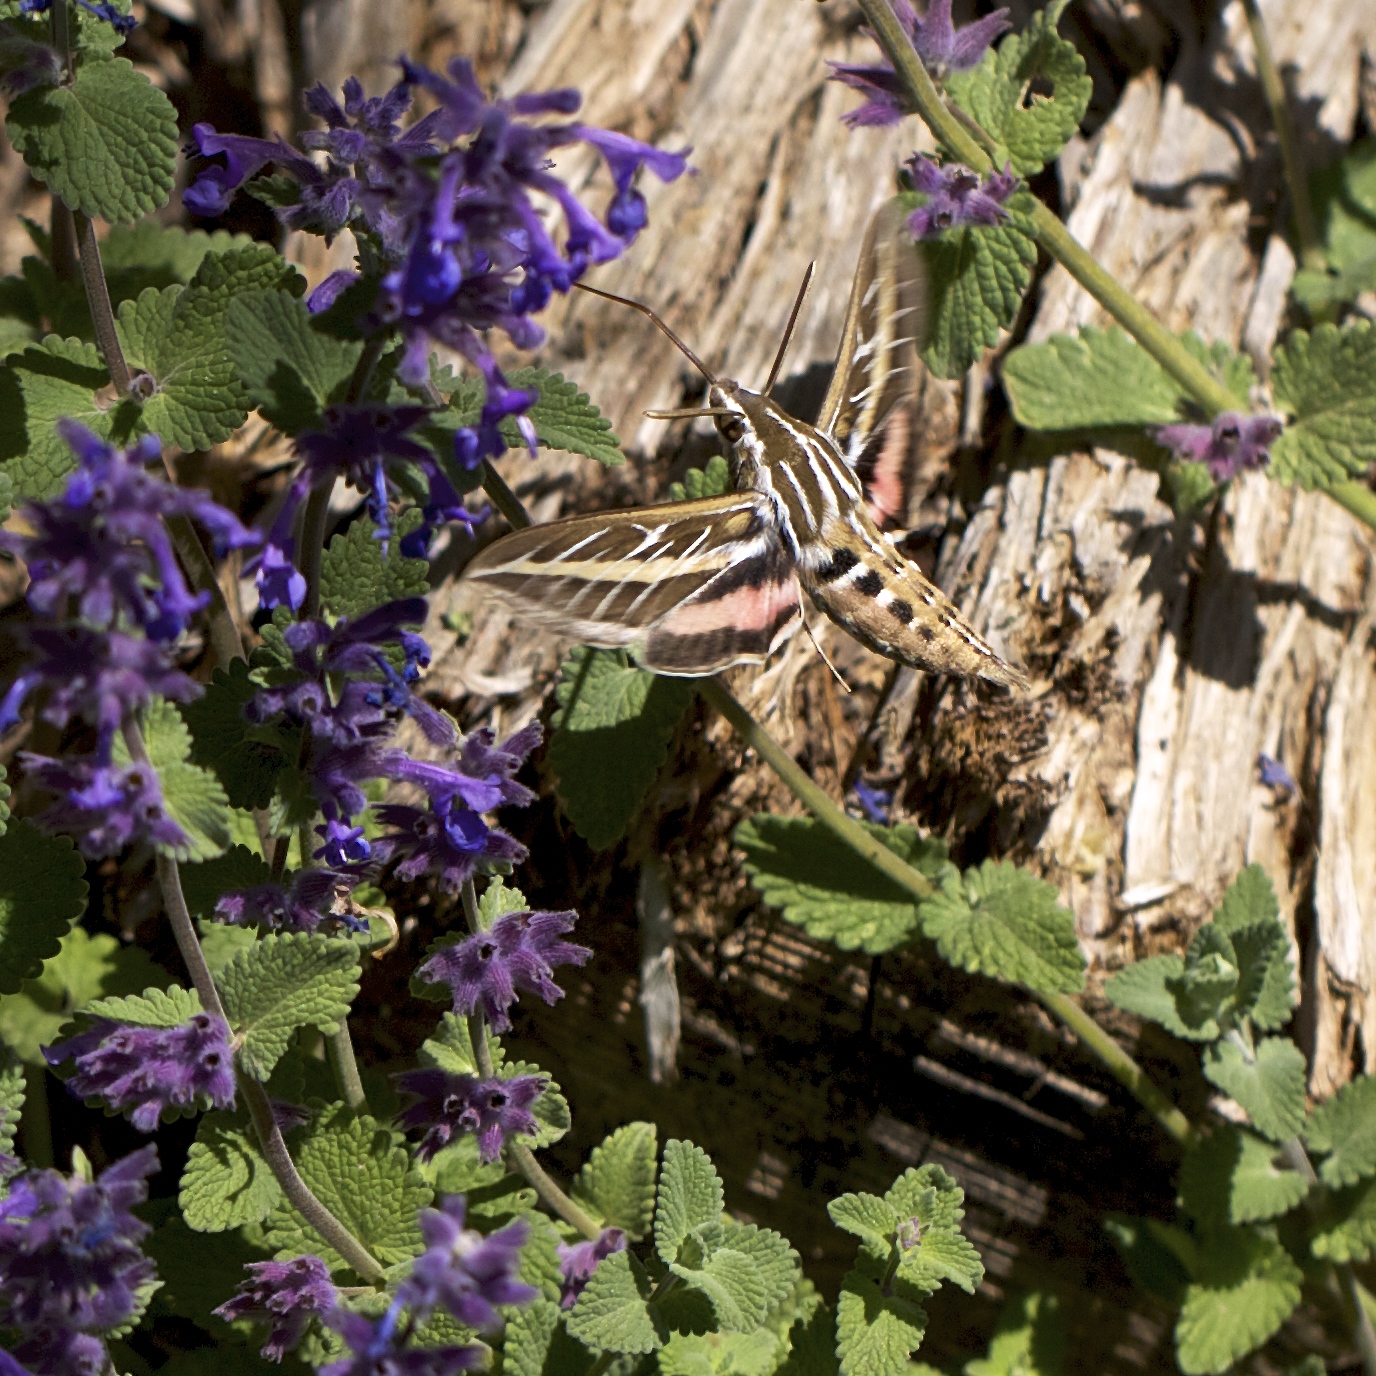 The sphinx moth is also attracted to Nepeta, and sometimes out in the morning.